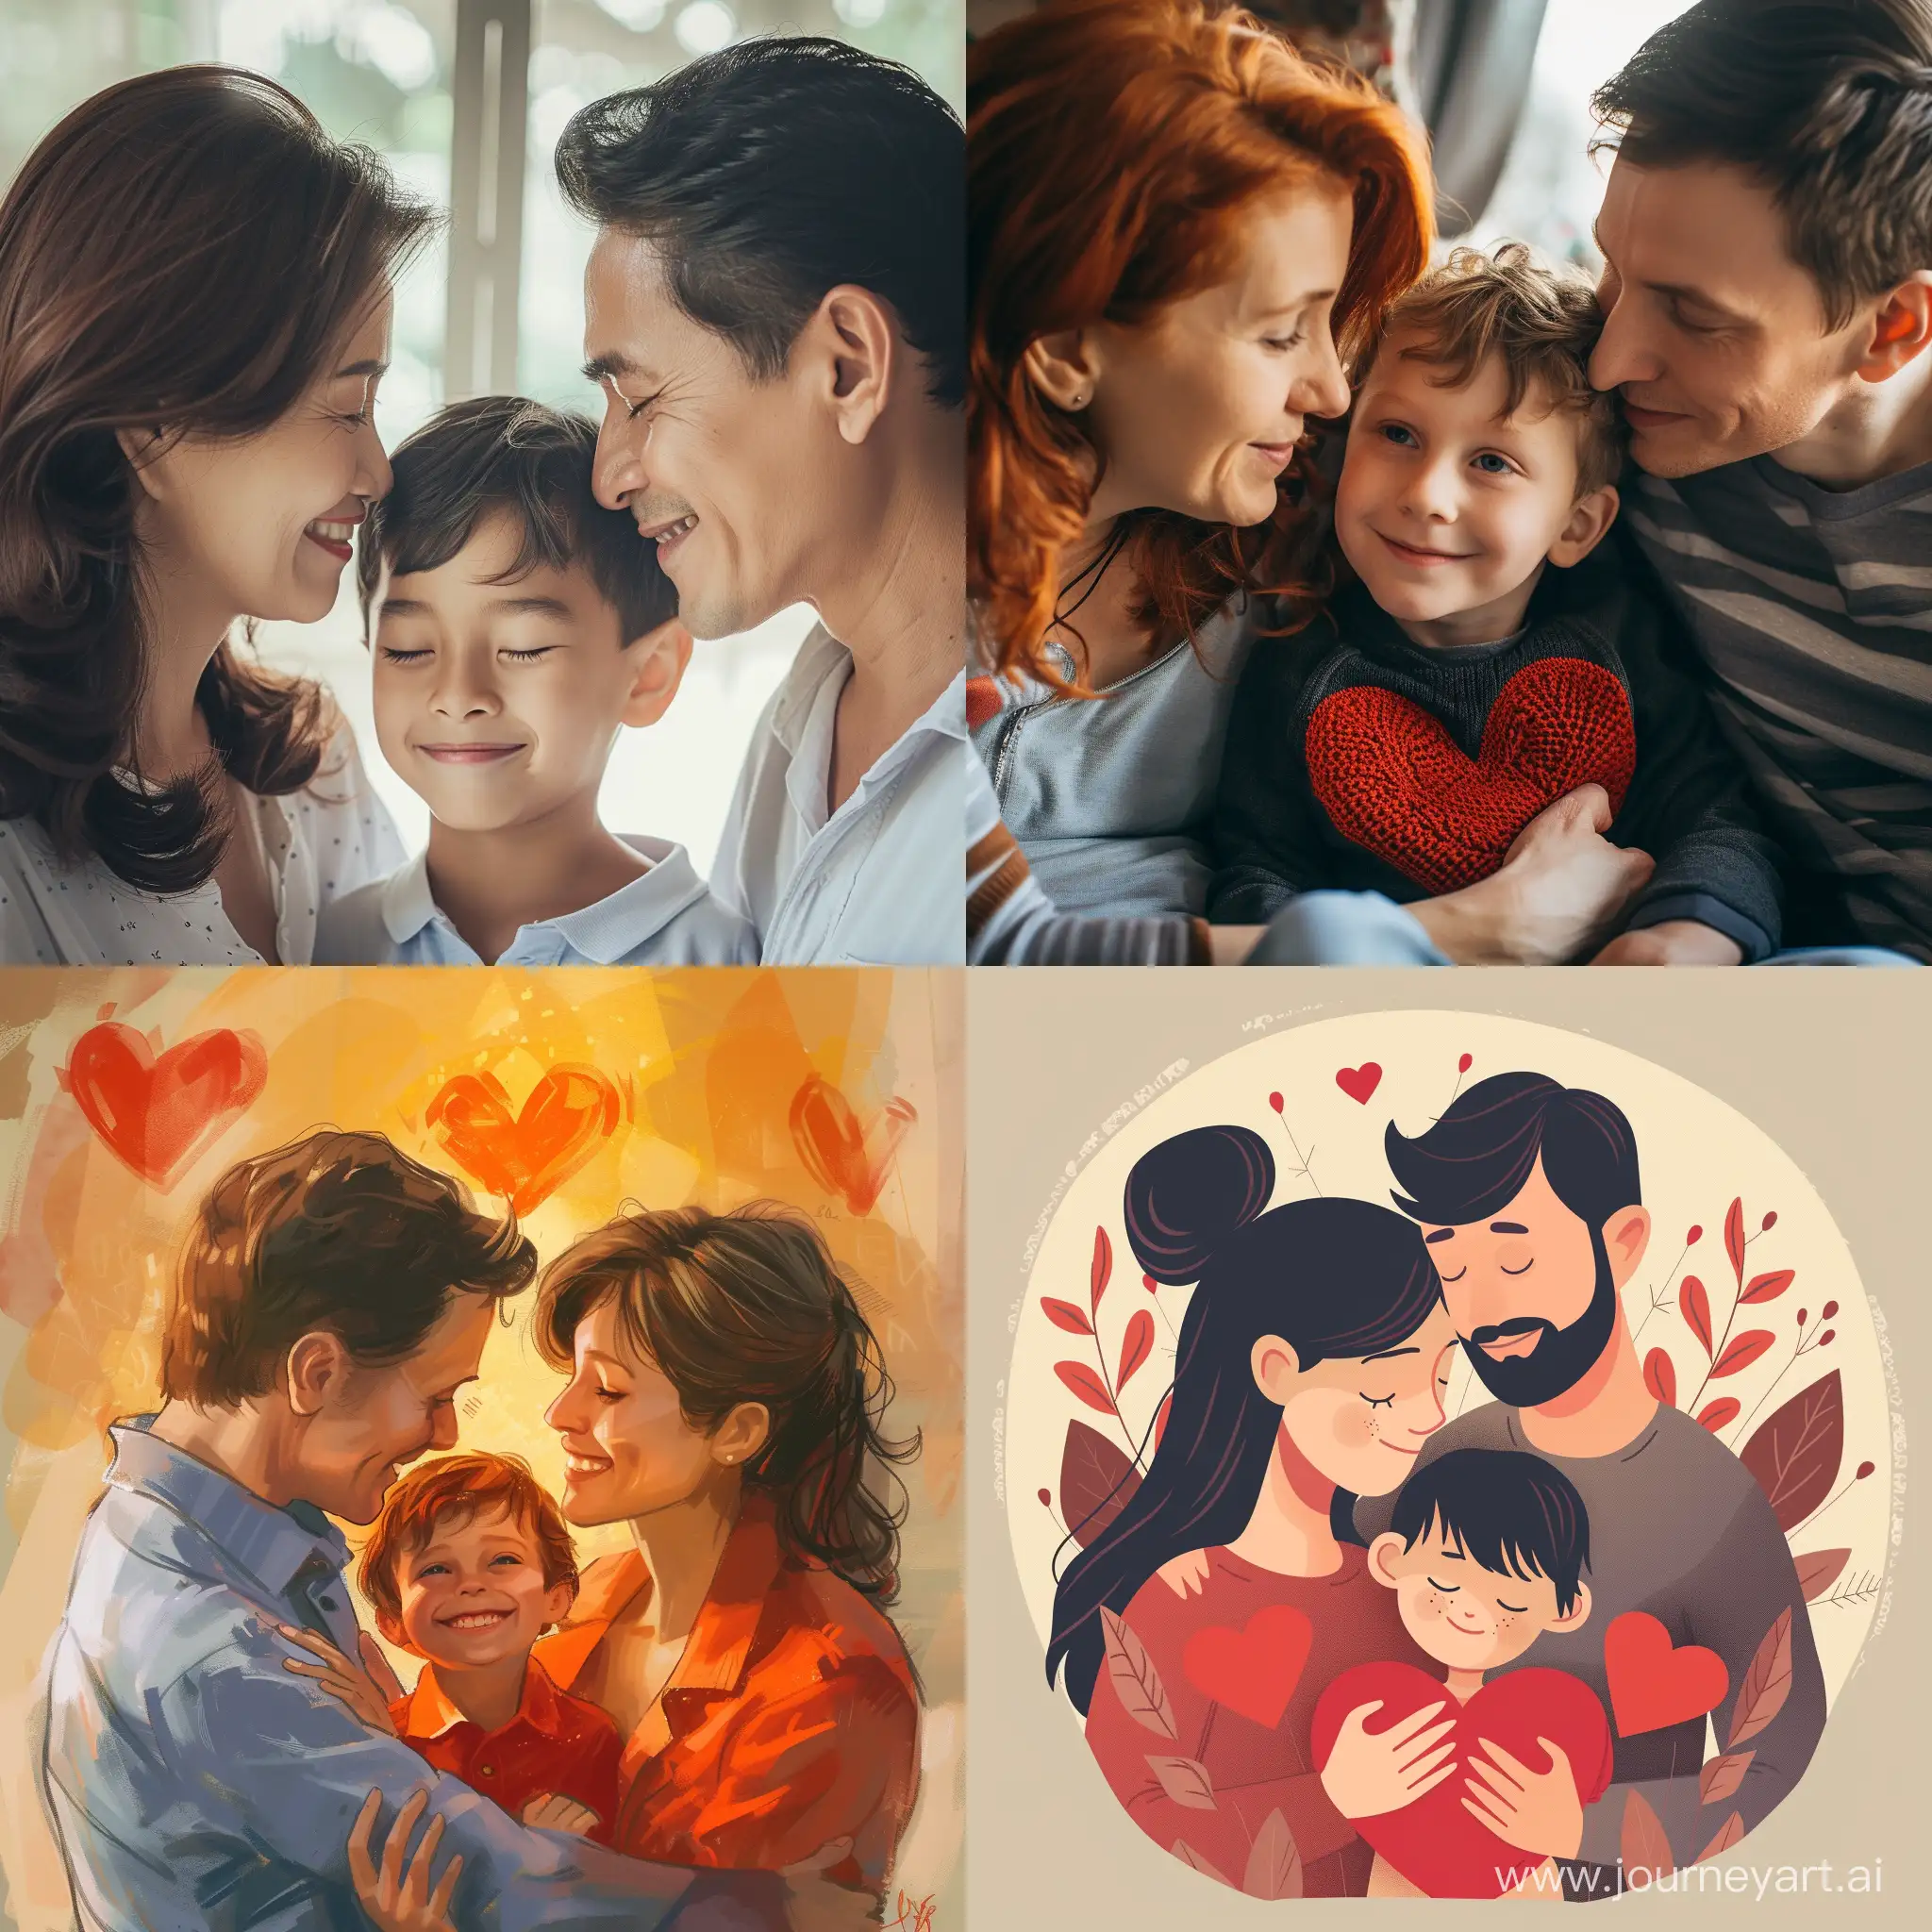 dad and mom give their son love and warmth. a picture in the style of a Valentine, says that "I love you."